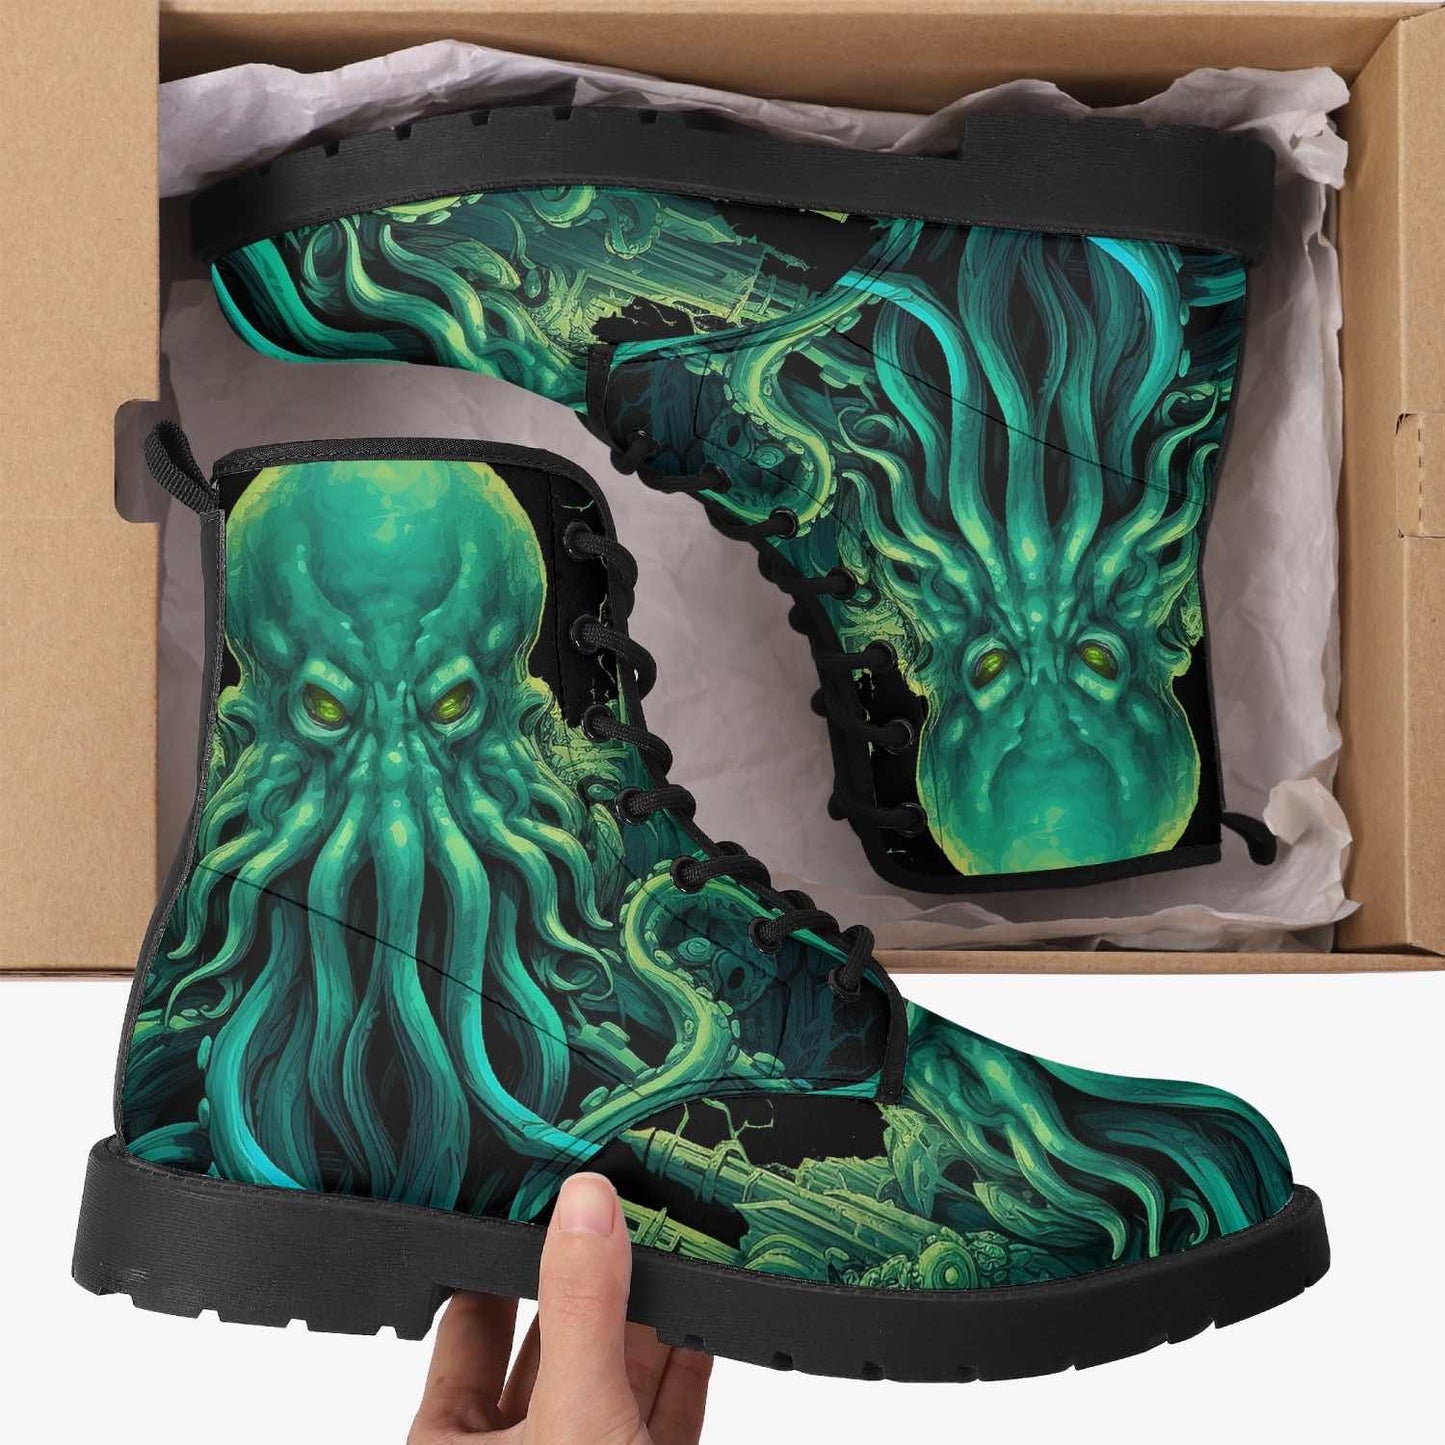 unboxing a Christmas present of a gothic pair of the mighty deep vibrant green and black Cthulhu sea monster on a vegan leather boots at Gallery Serpentine